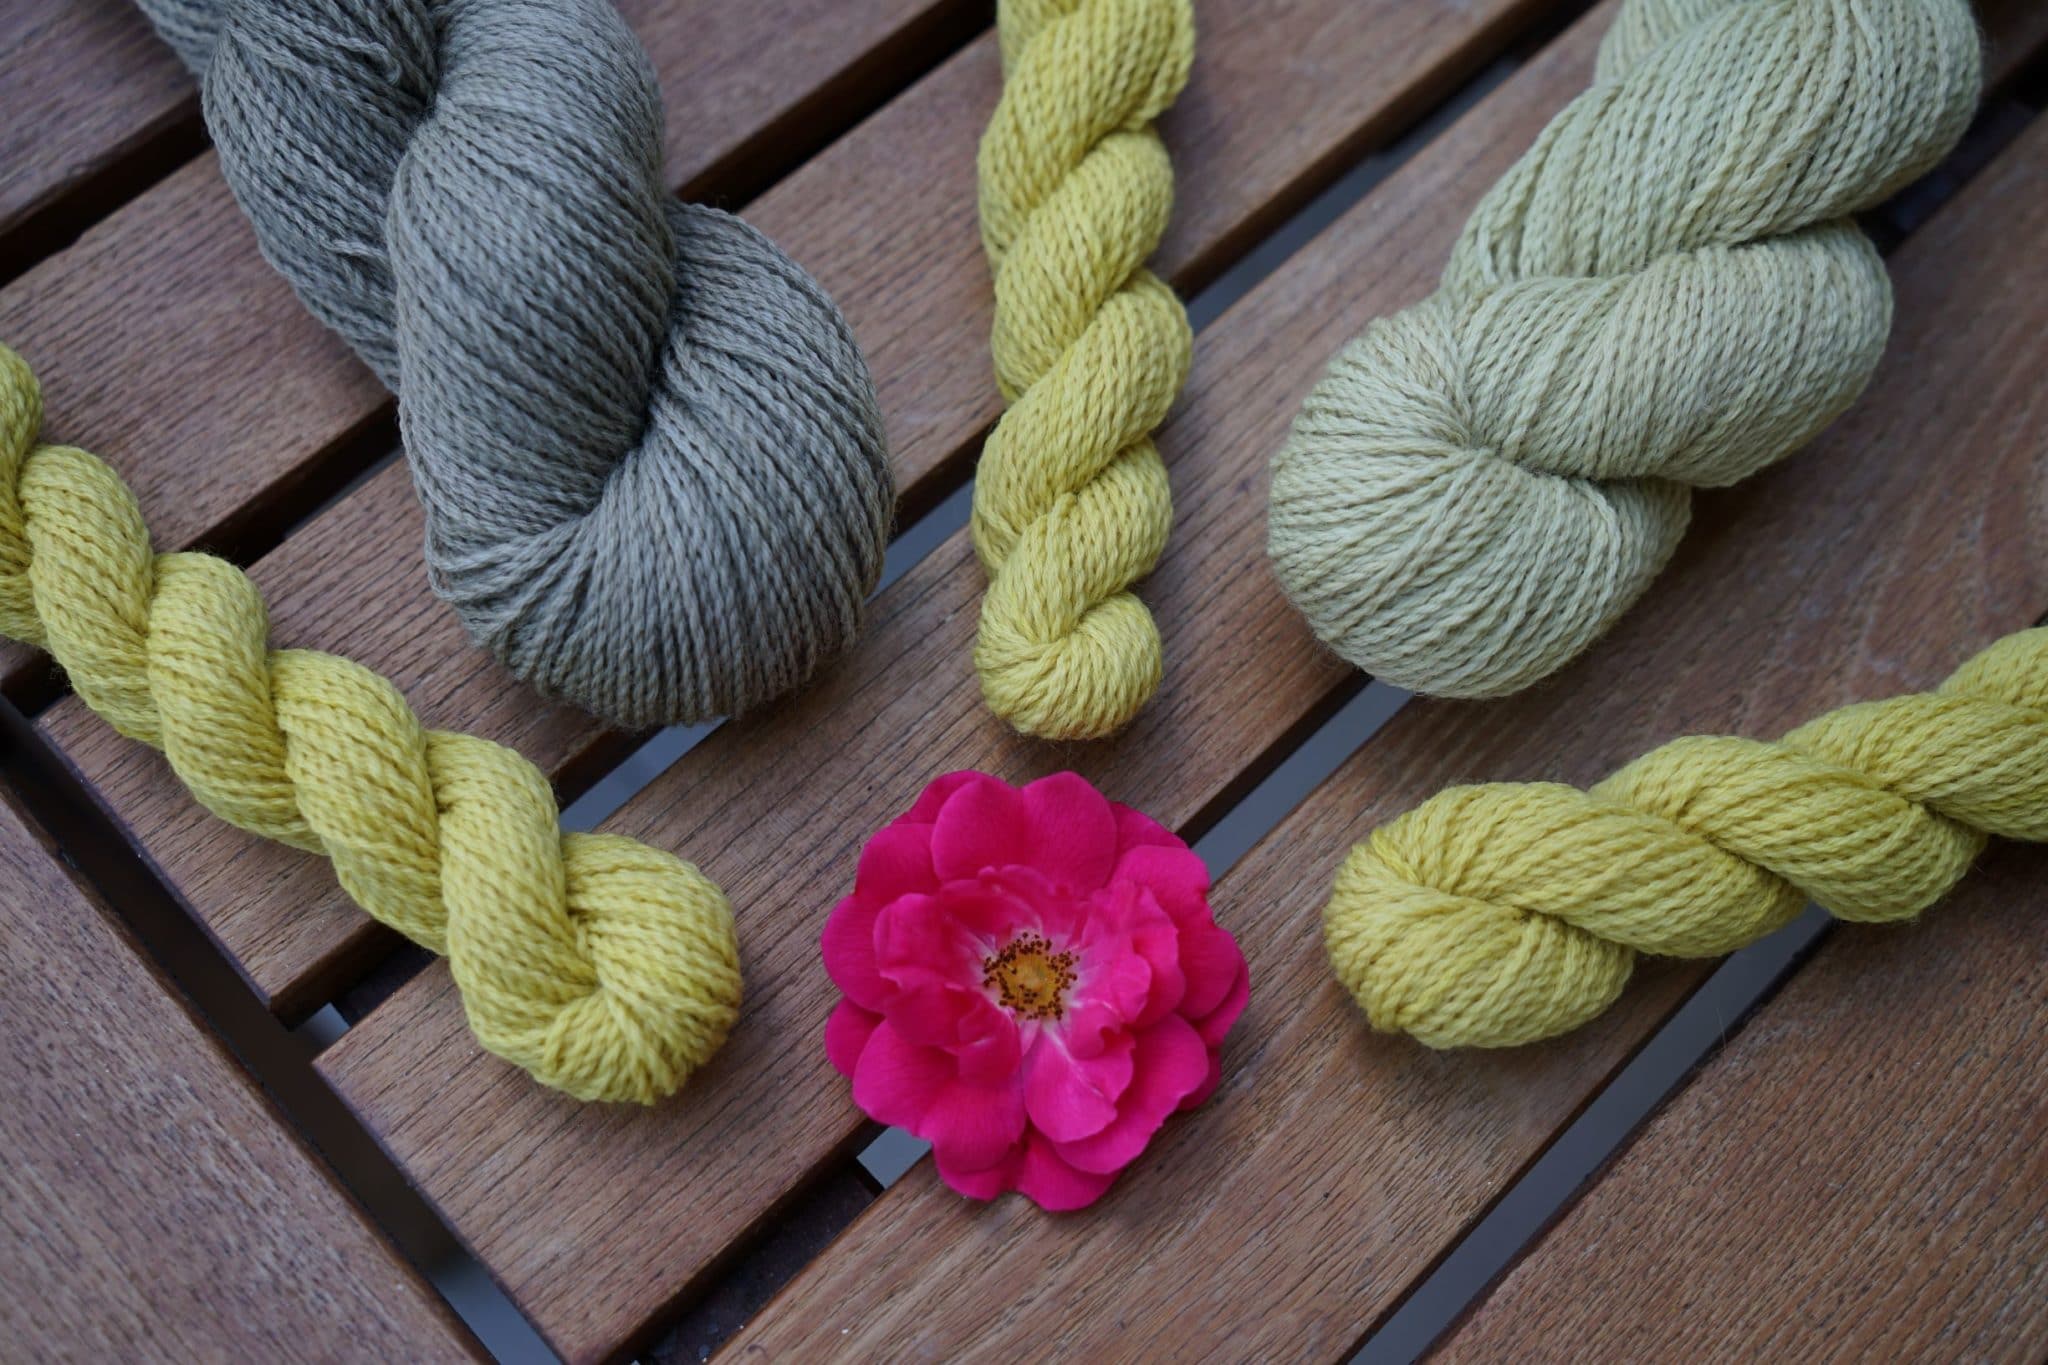 Has anyone used this yarn? Did you like it / hate it? I want to